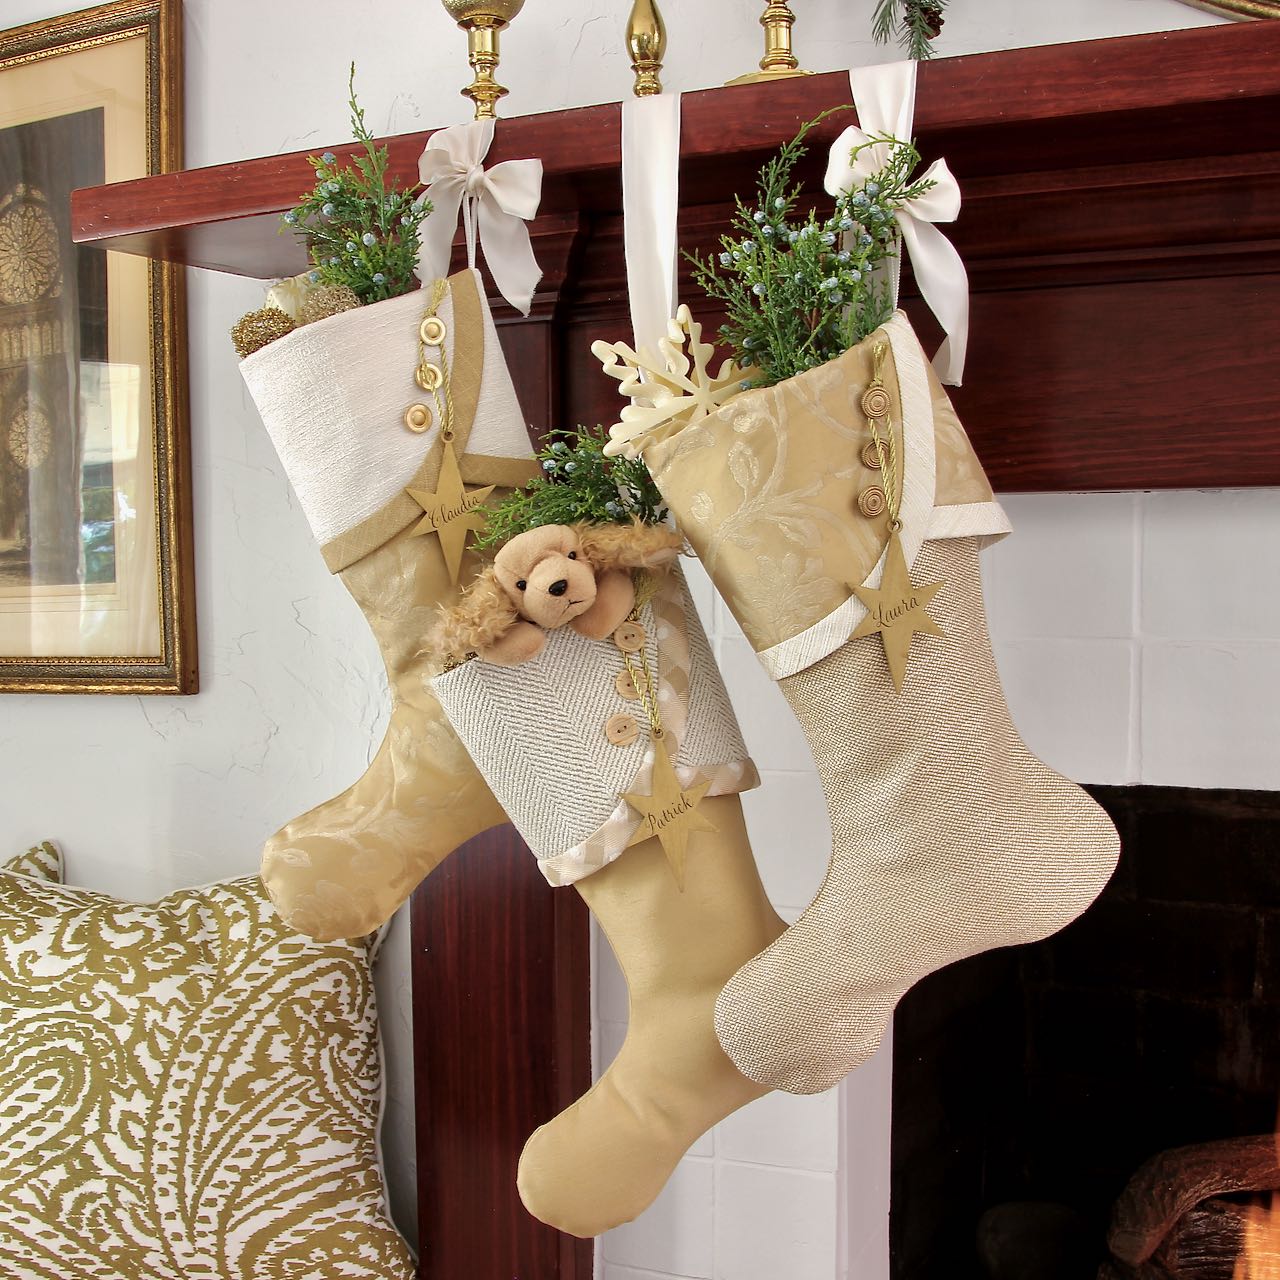 3 gold Christmas stockings with gold star name tags hanging from wood mantel